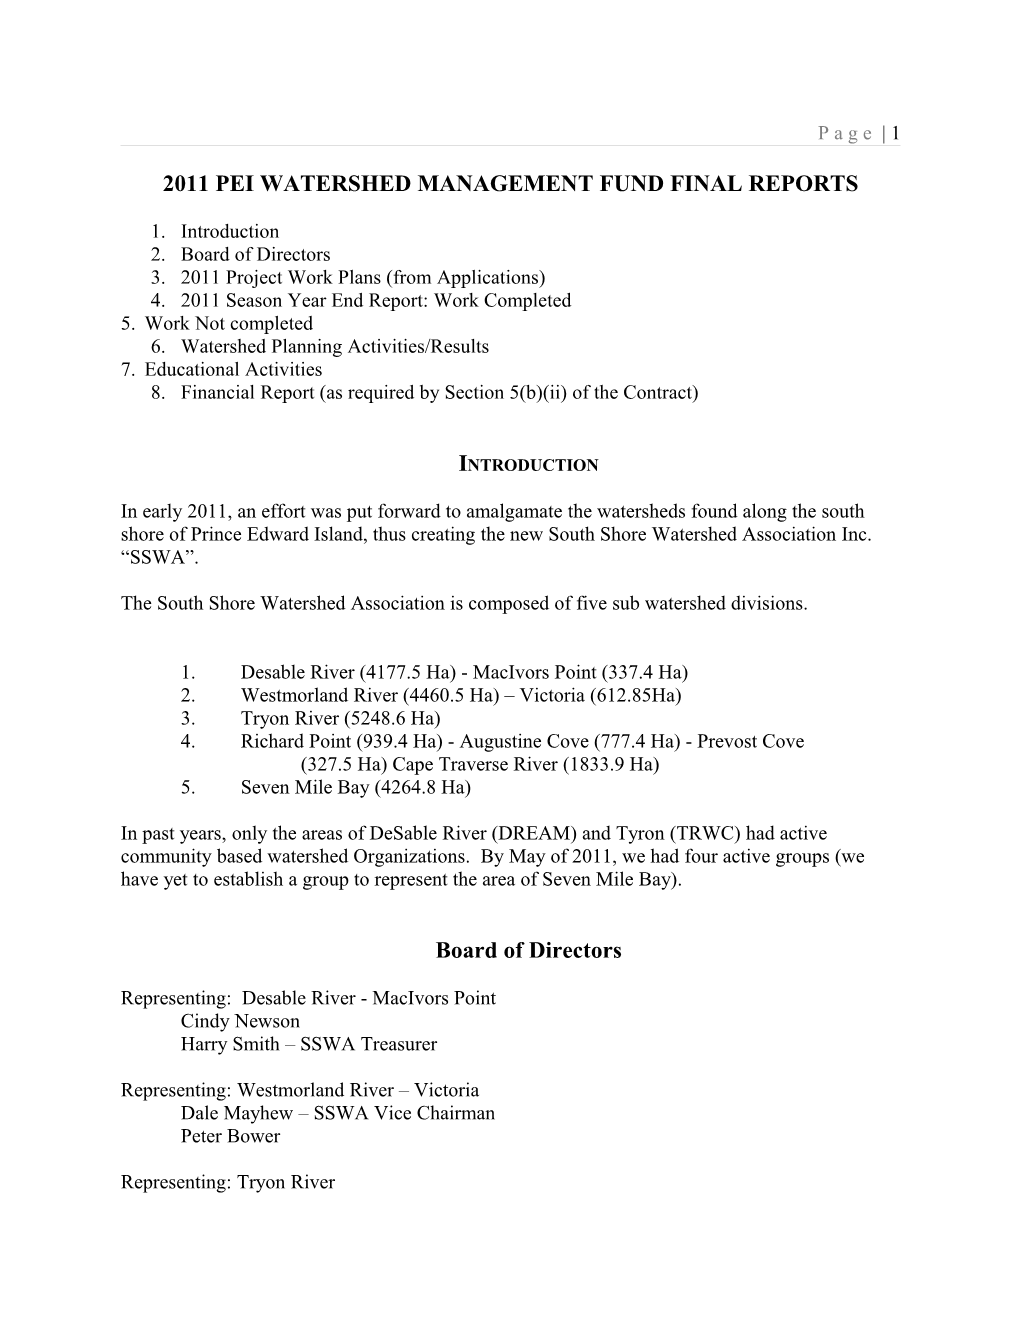 2011 PEI Watershed Management Fund Final Reports